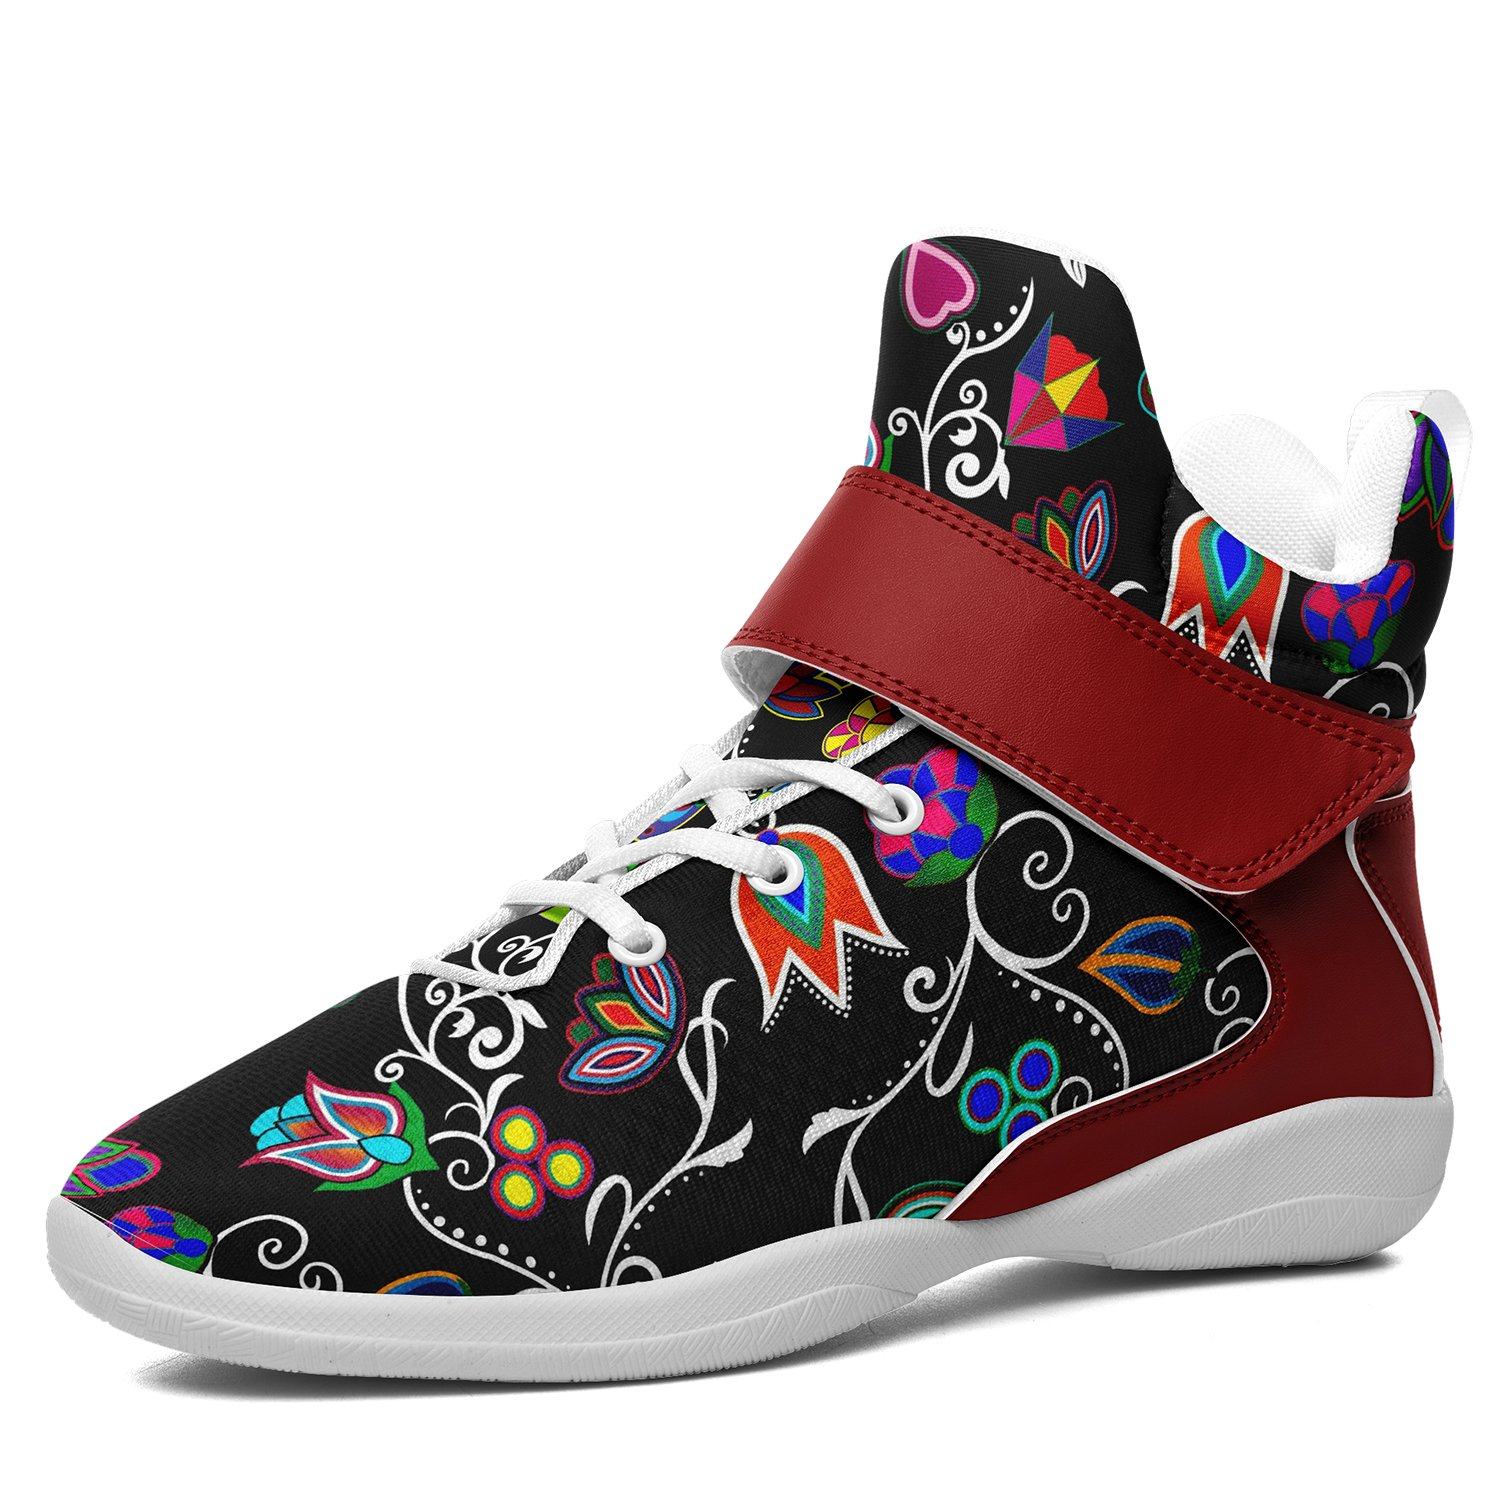 Indigenous Paisley Black Ipottaa Basketball / Sport High Top Shoes 49 Dzine US Women 4.5 / US Youth 3.5 / EUR 35 White Sole with Dark Red Strap 